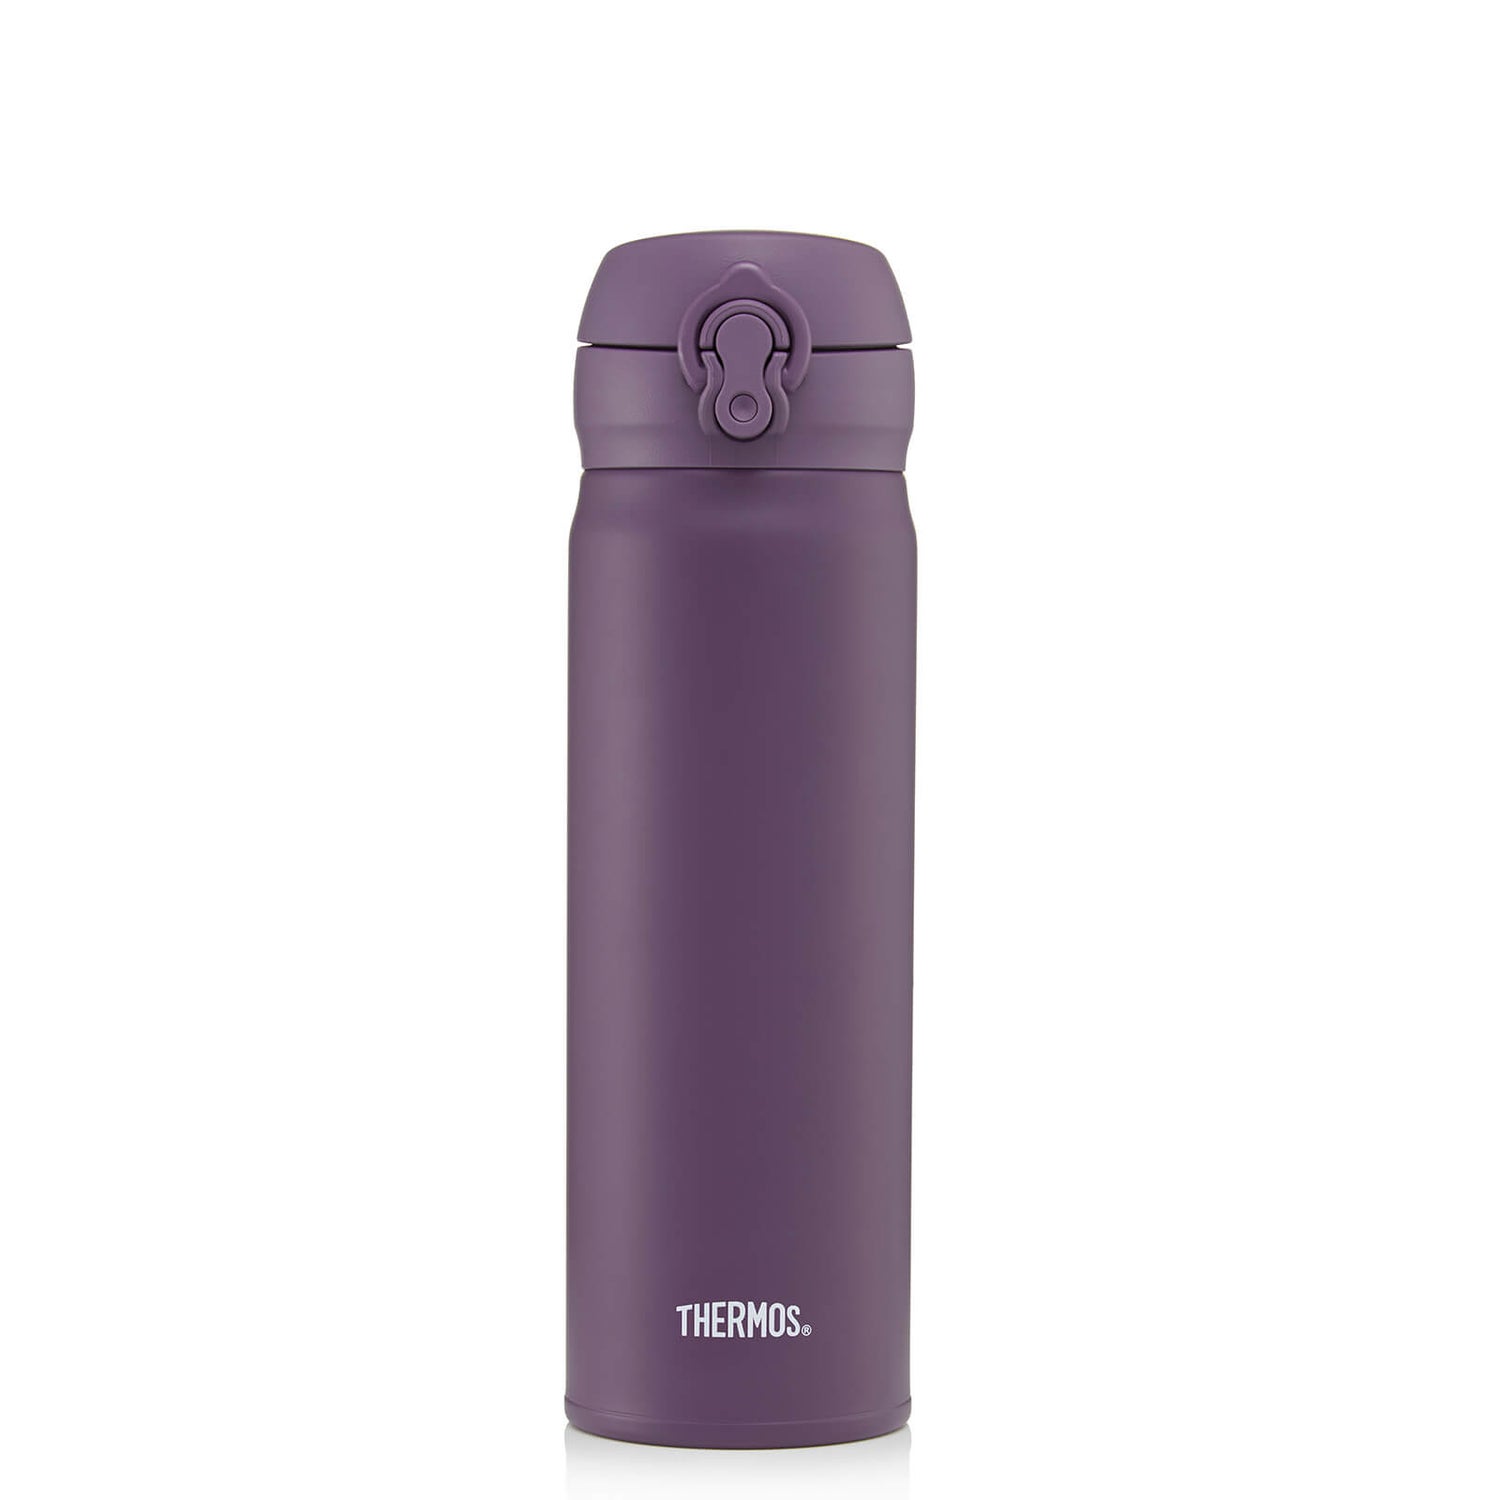 Thermos Superlight Direct Drink Flask - Plum